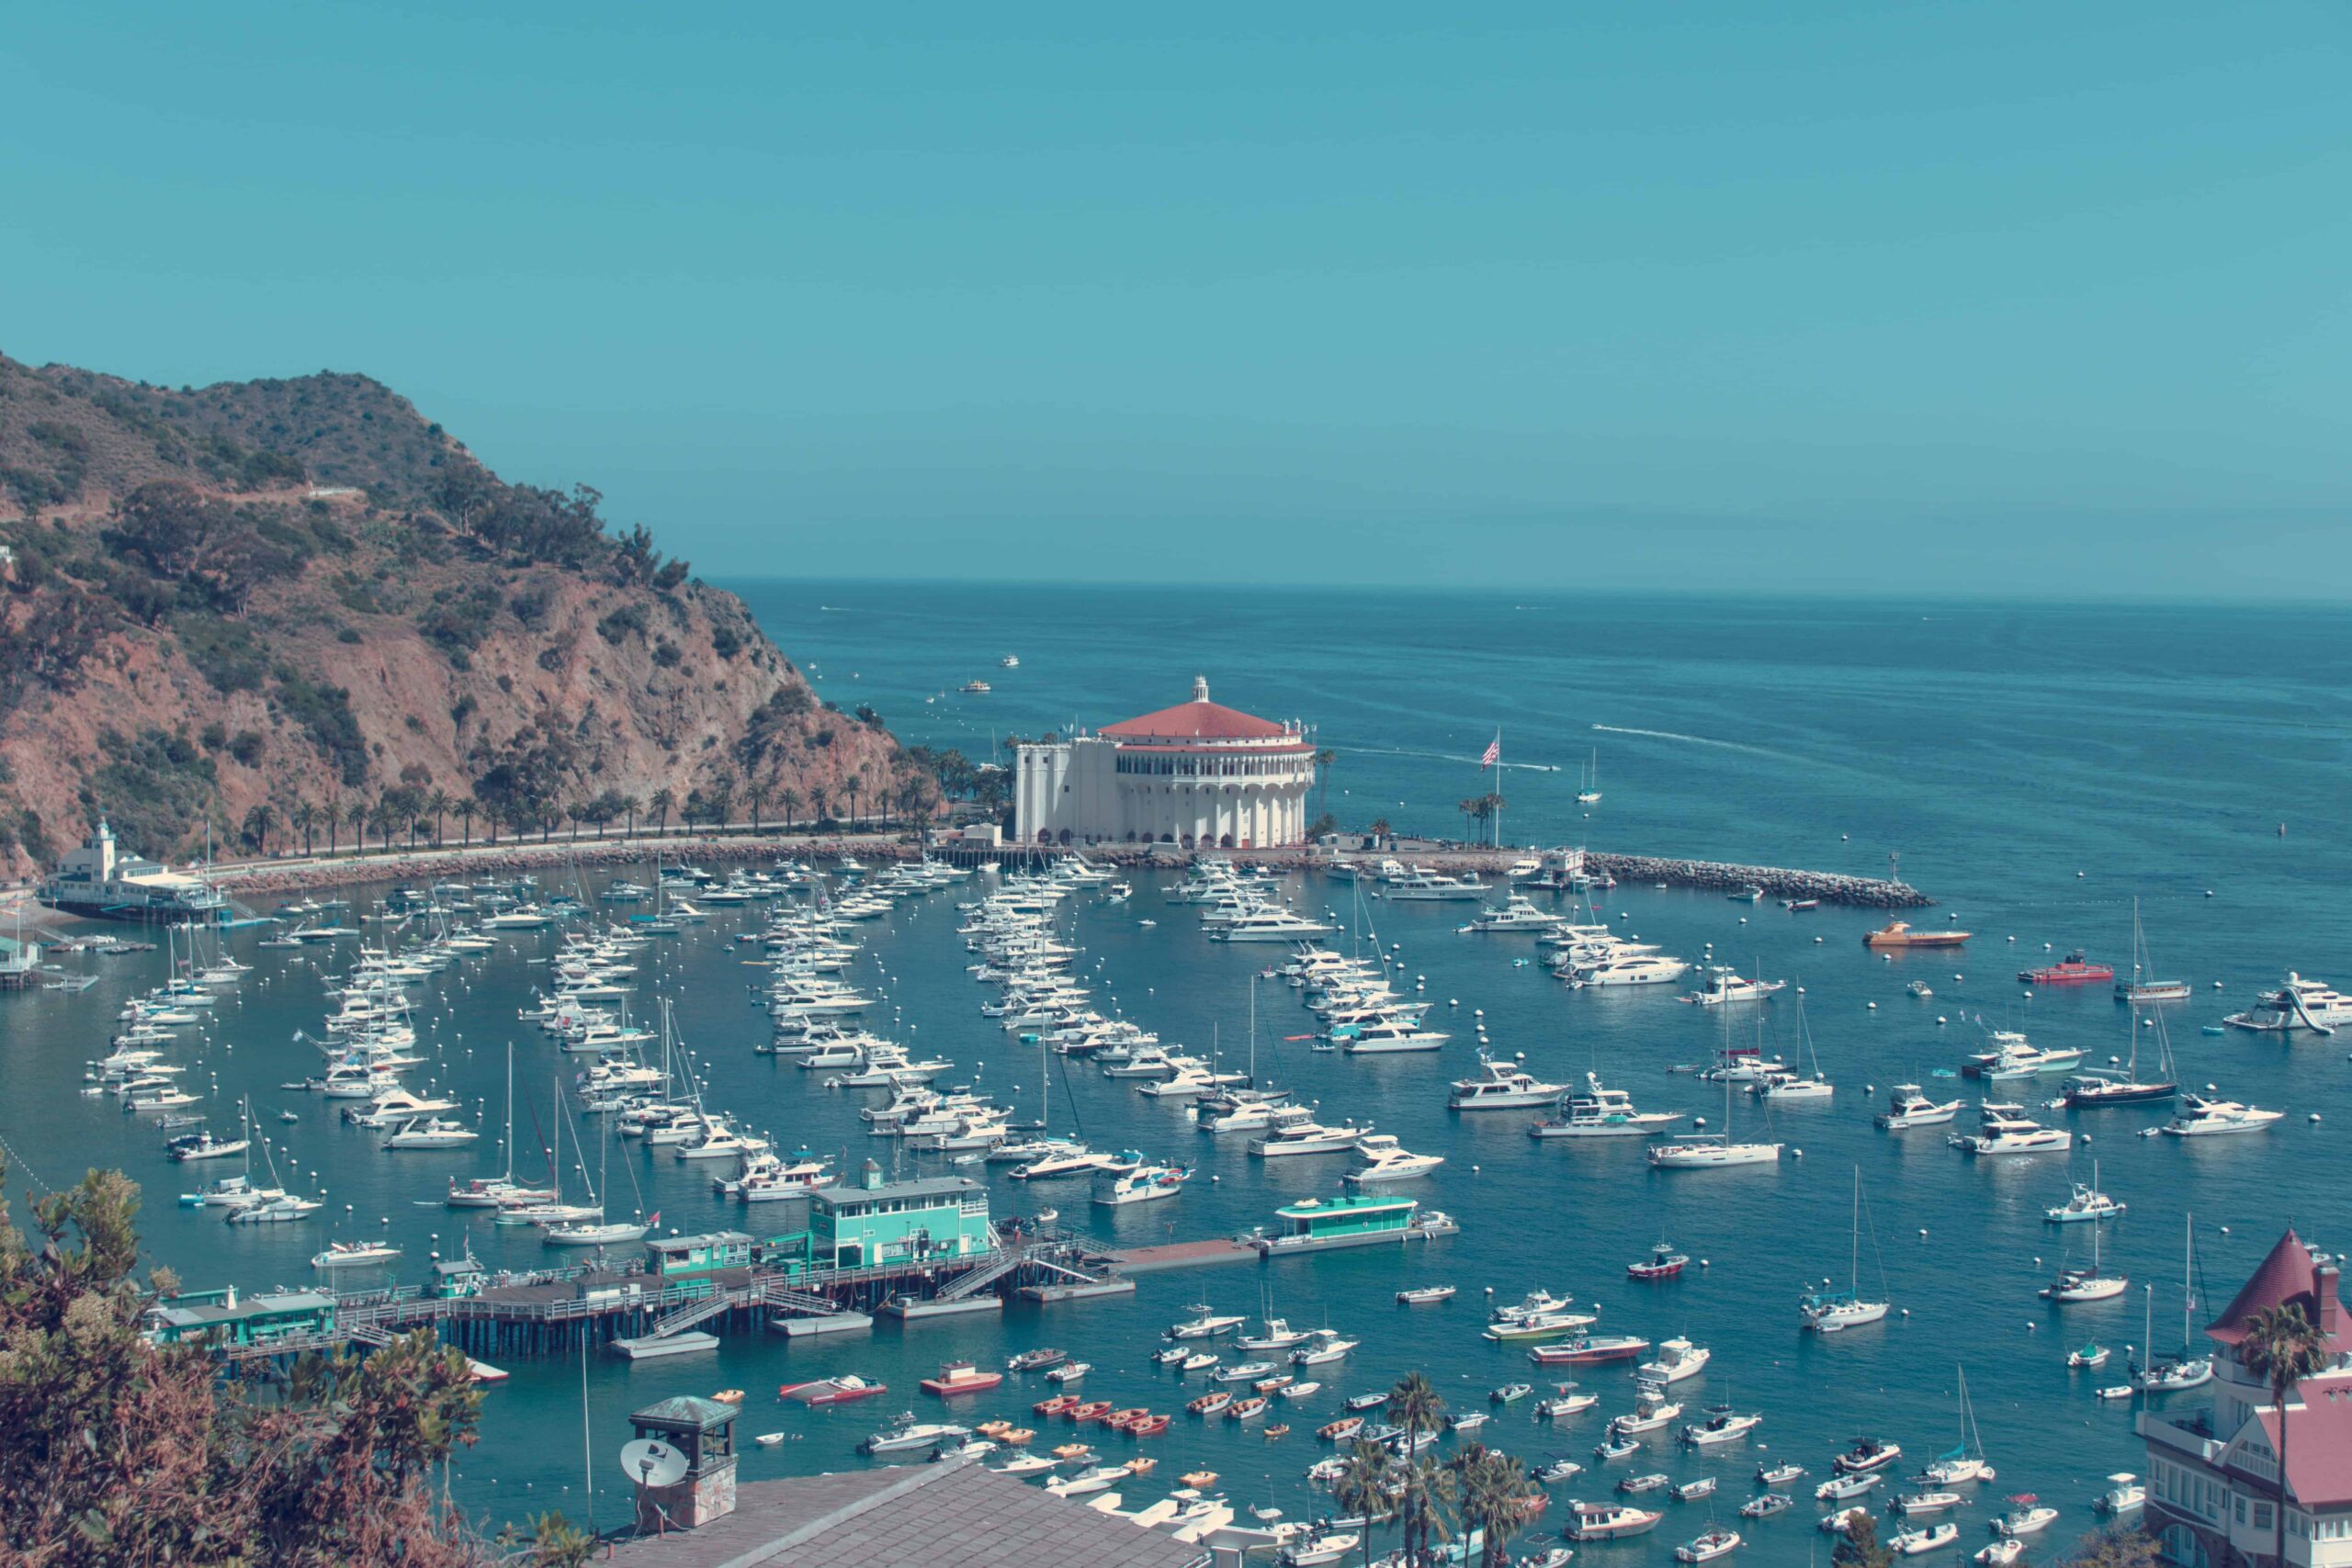 Take a Day Trip to Catalina Island and Go Snorkeling or Diving